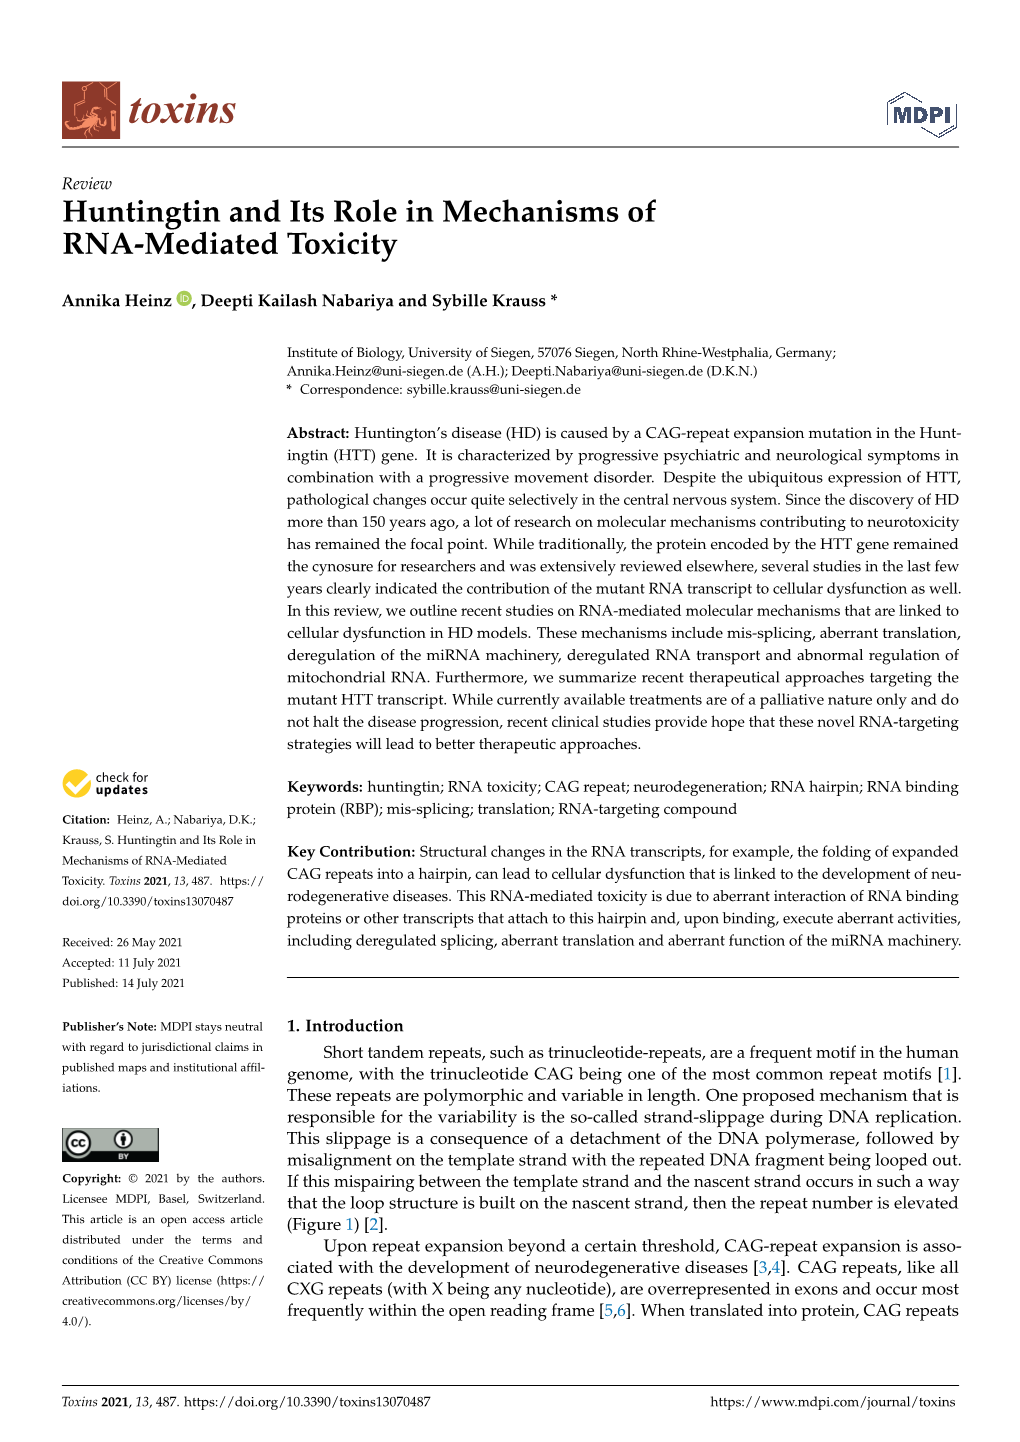 Huntingtin and Its Role in Mechanisms of RNA-Mediated Toxicity